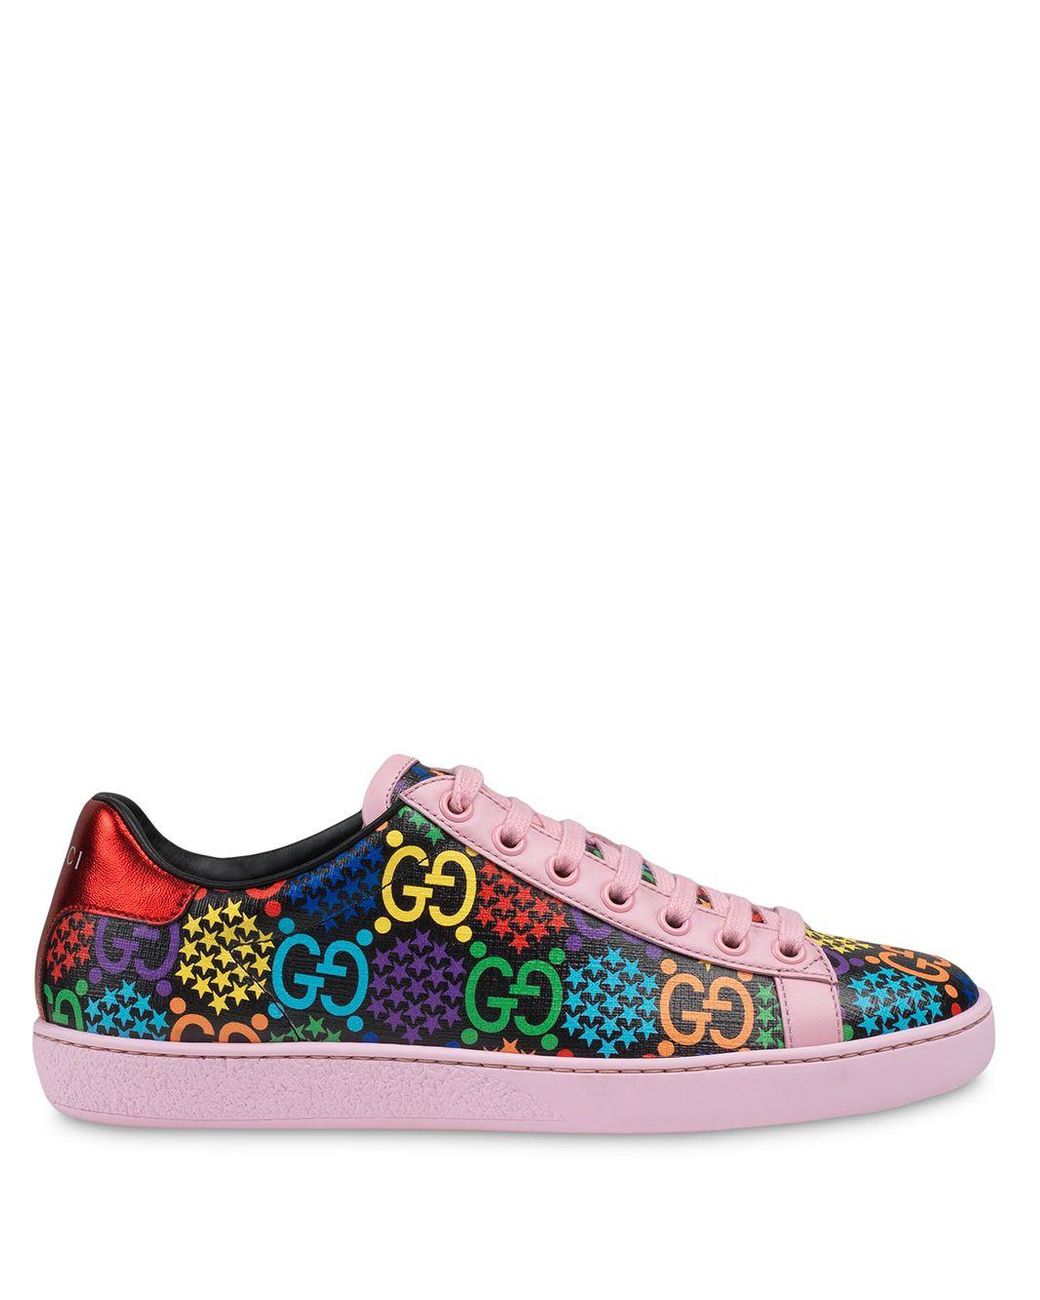 Gucci Canvas GG Psychedelic Ace Sneakers in Pink | Lyst UK